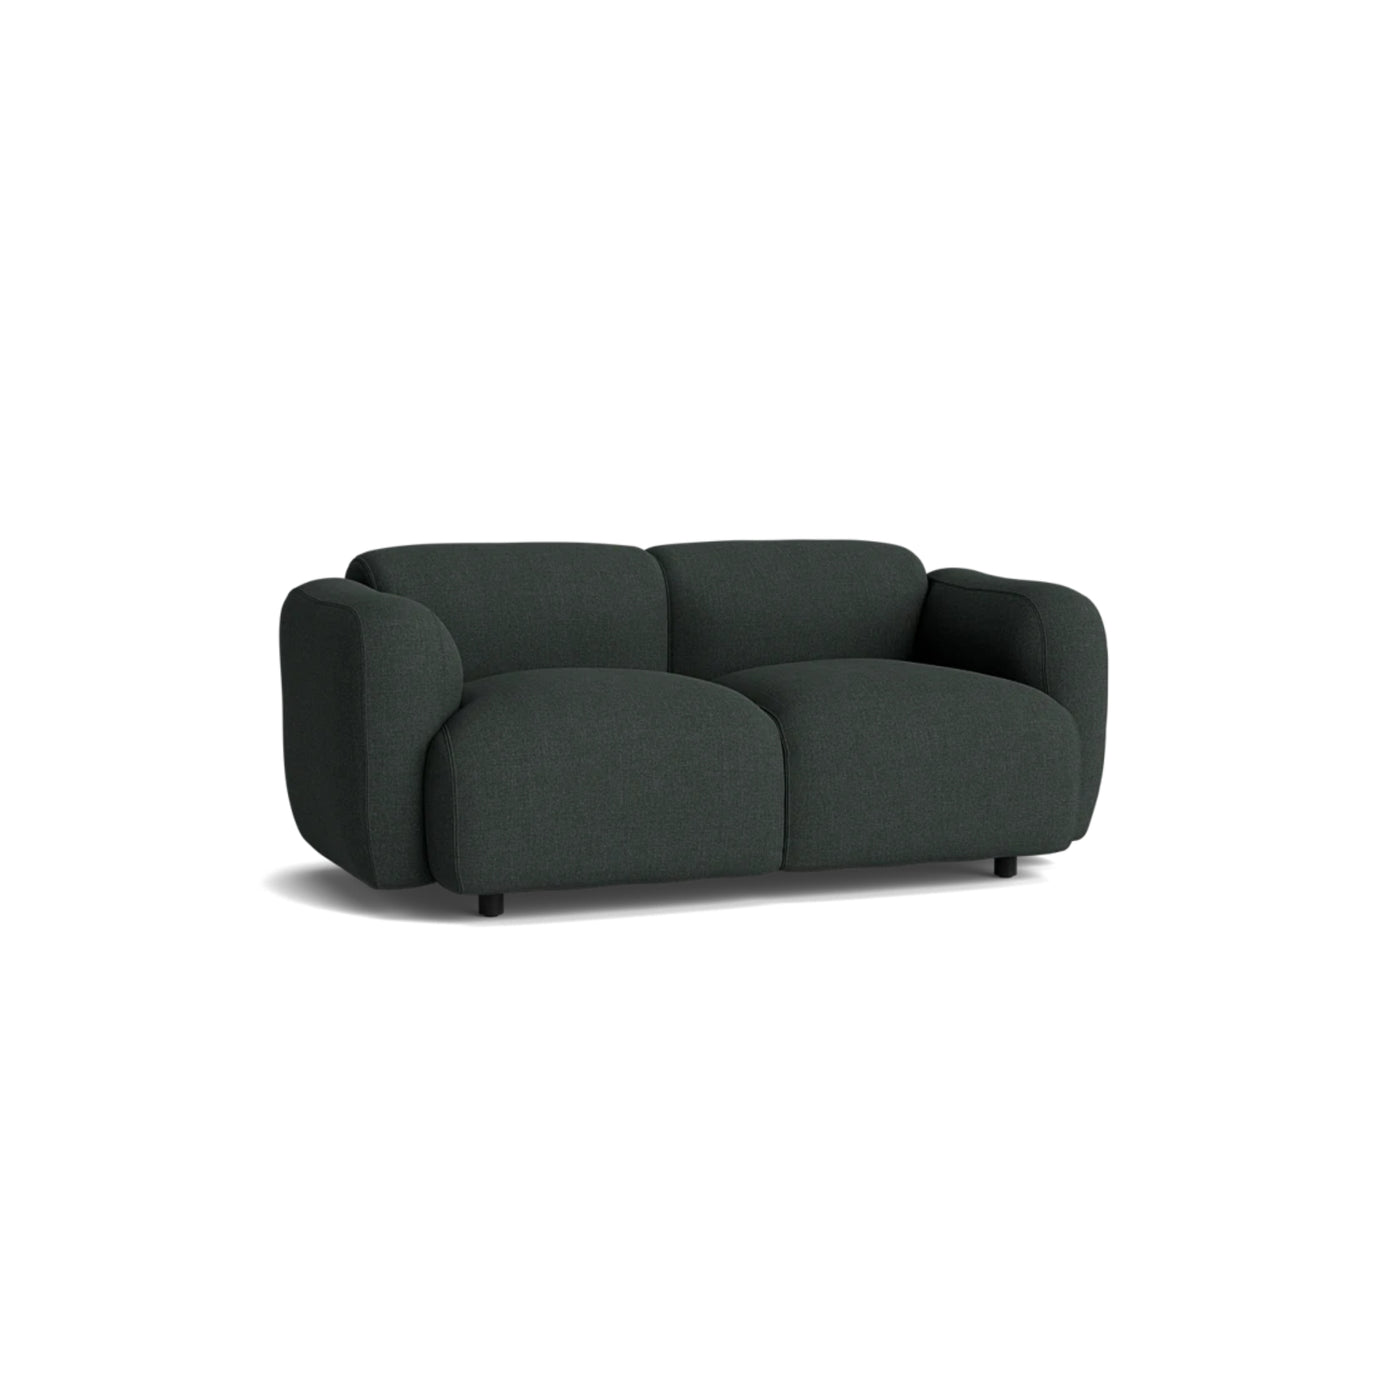 Normann Copenhagen Swell 2 Seater Sofa at someday designs. #colour_remix-973